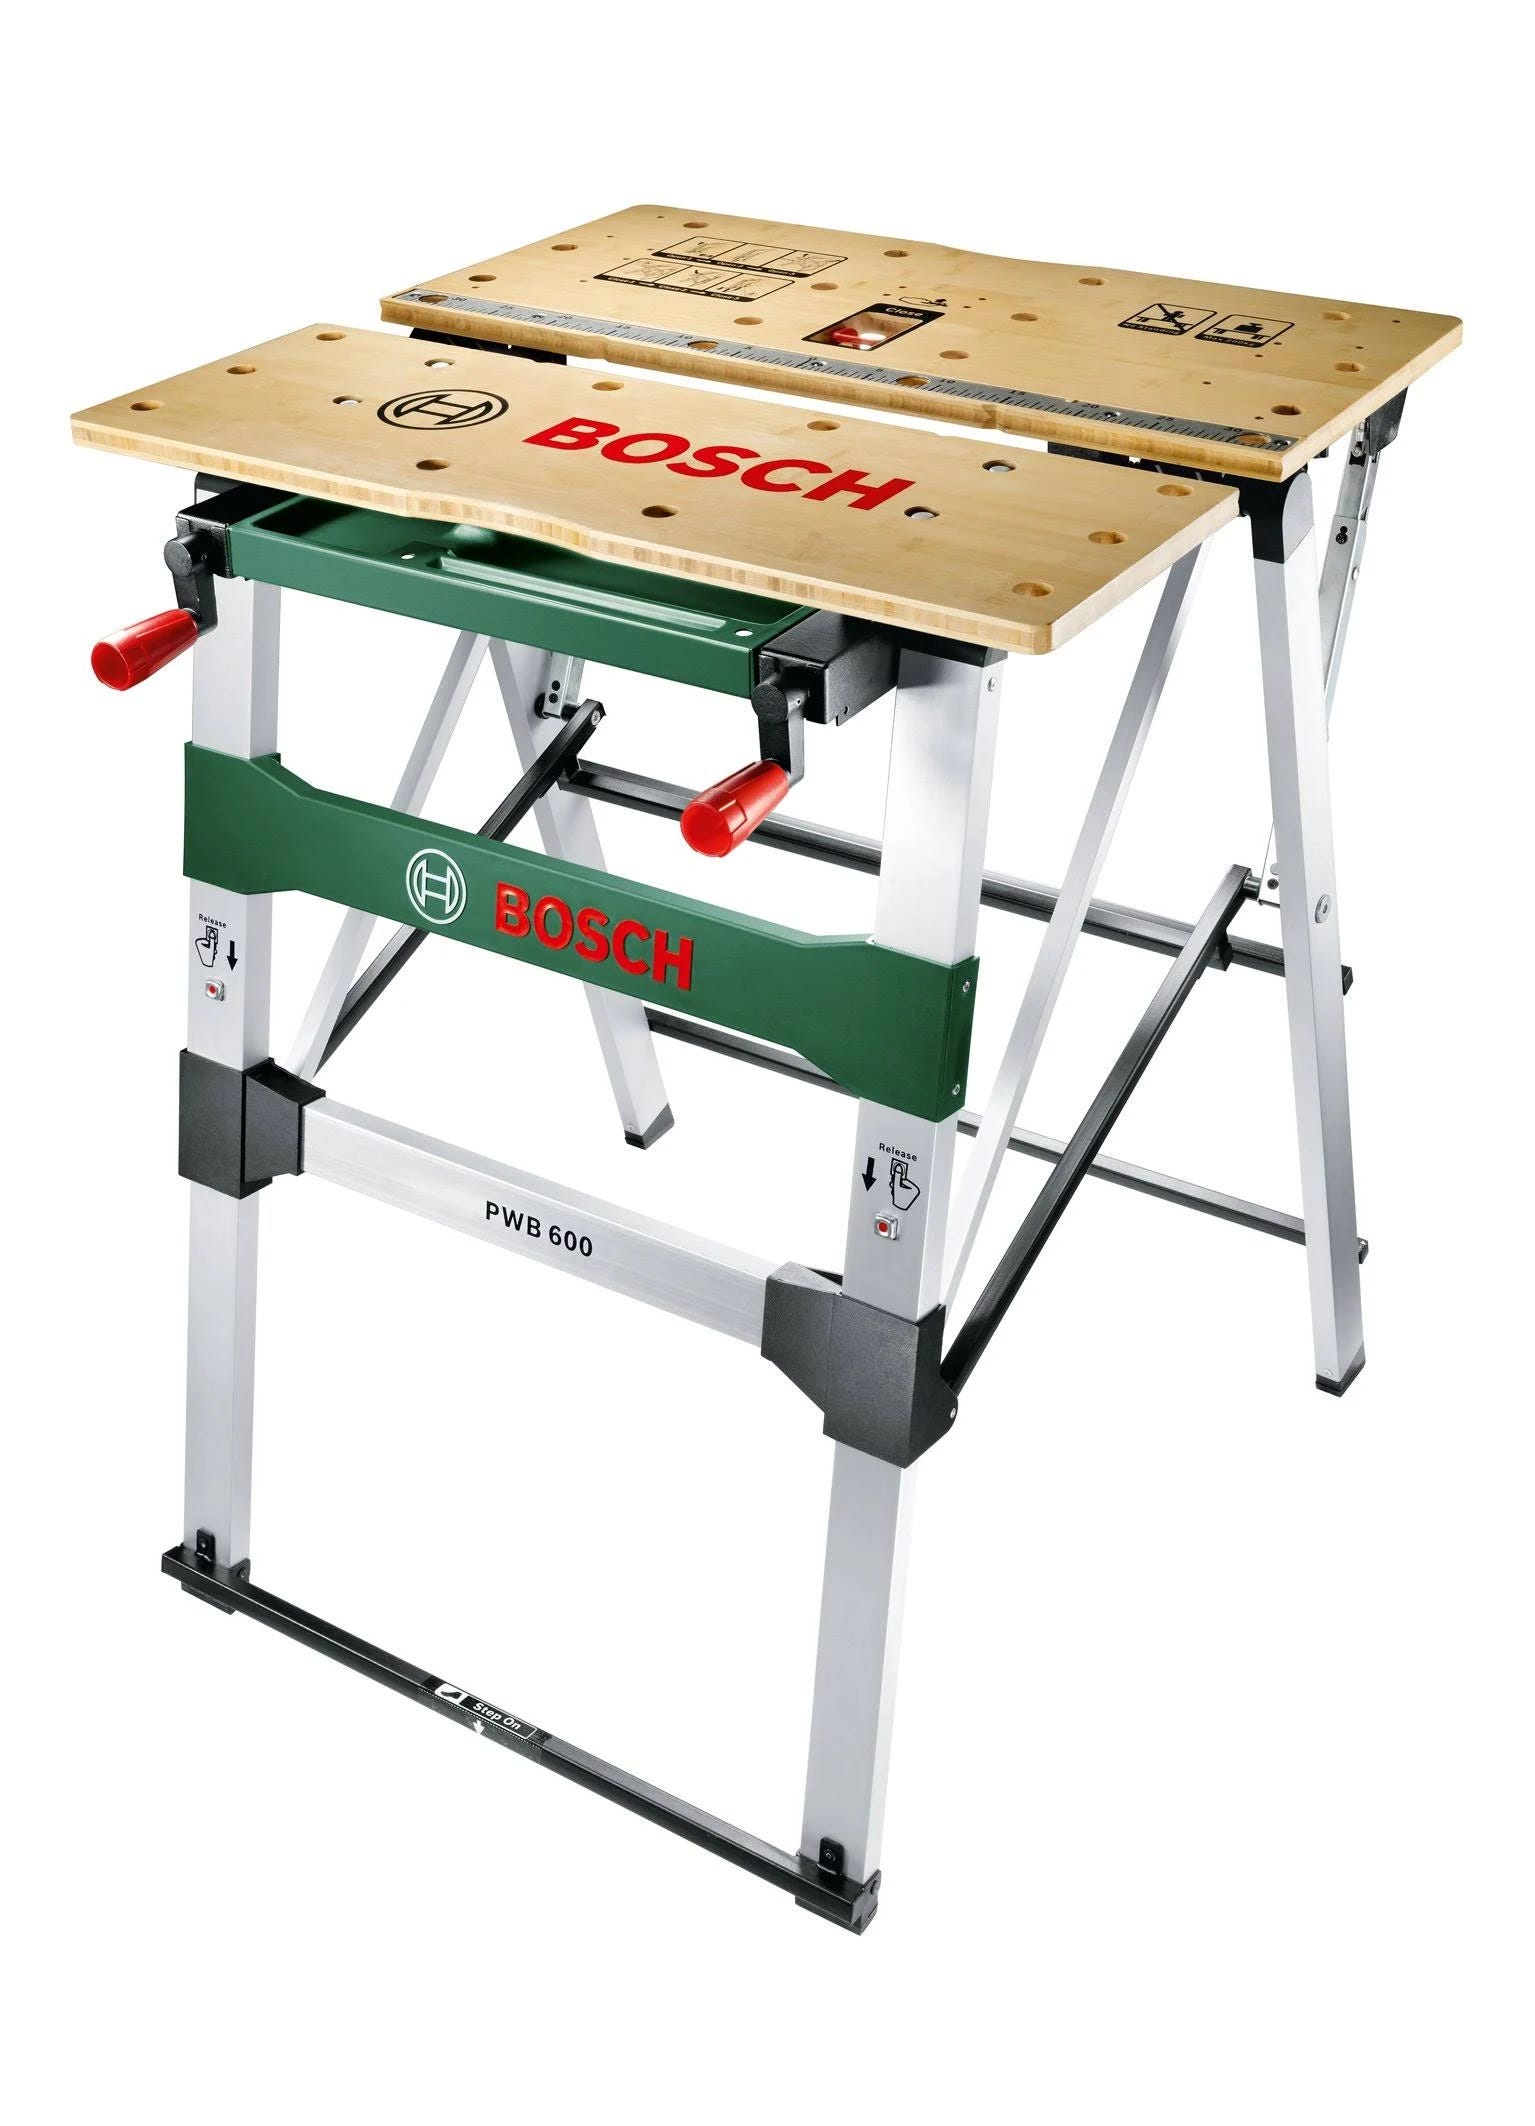 Portable Bosch Workbench with Flexible Clamping Jaws for DIY Tools and Construction | Image